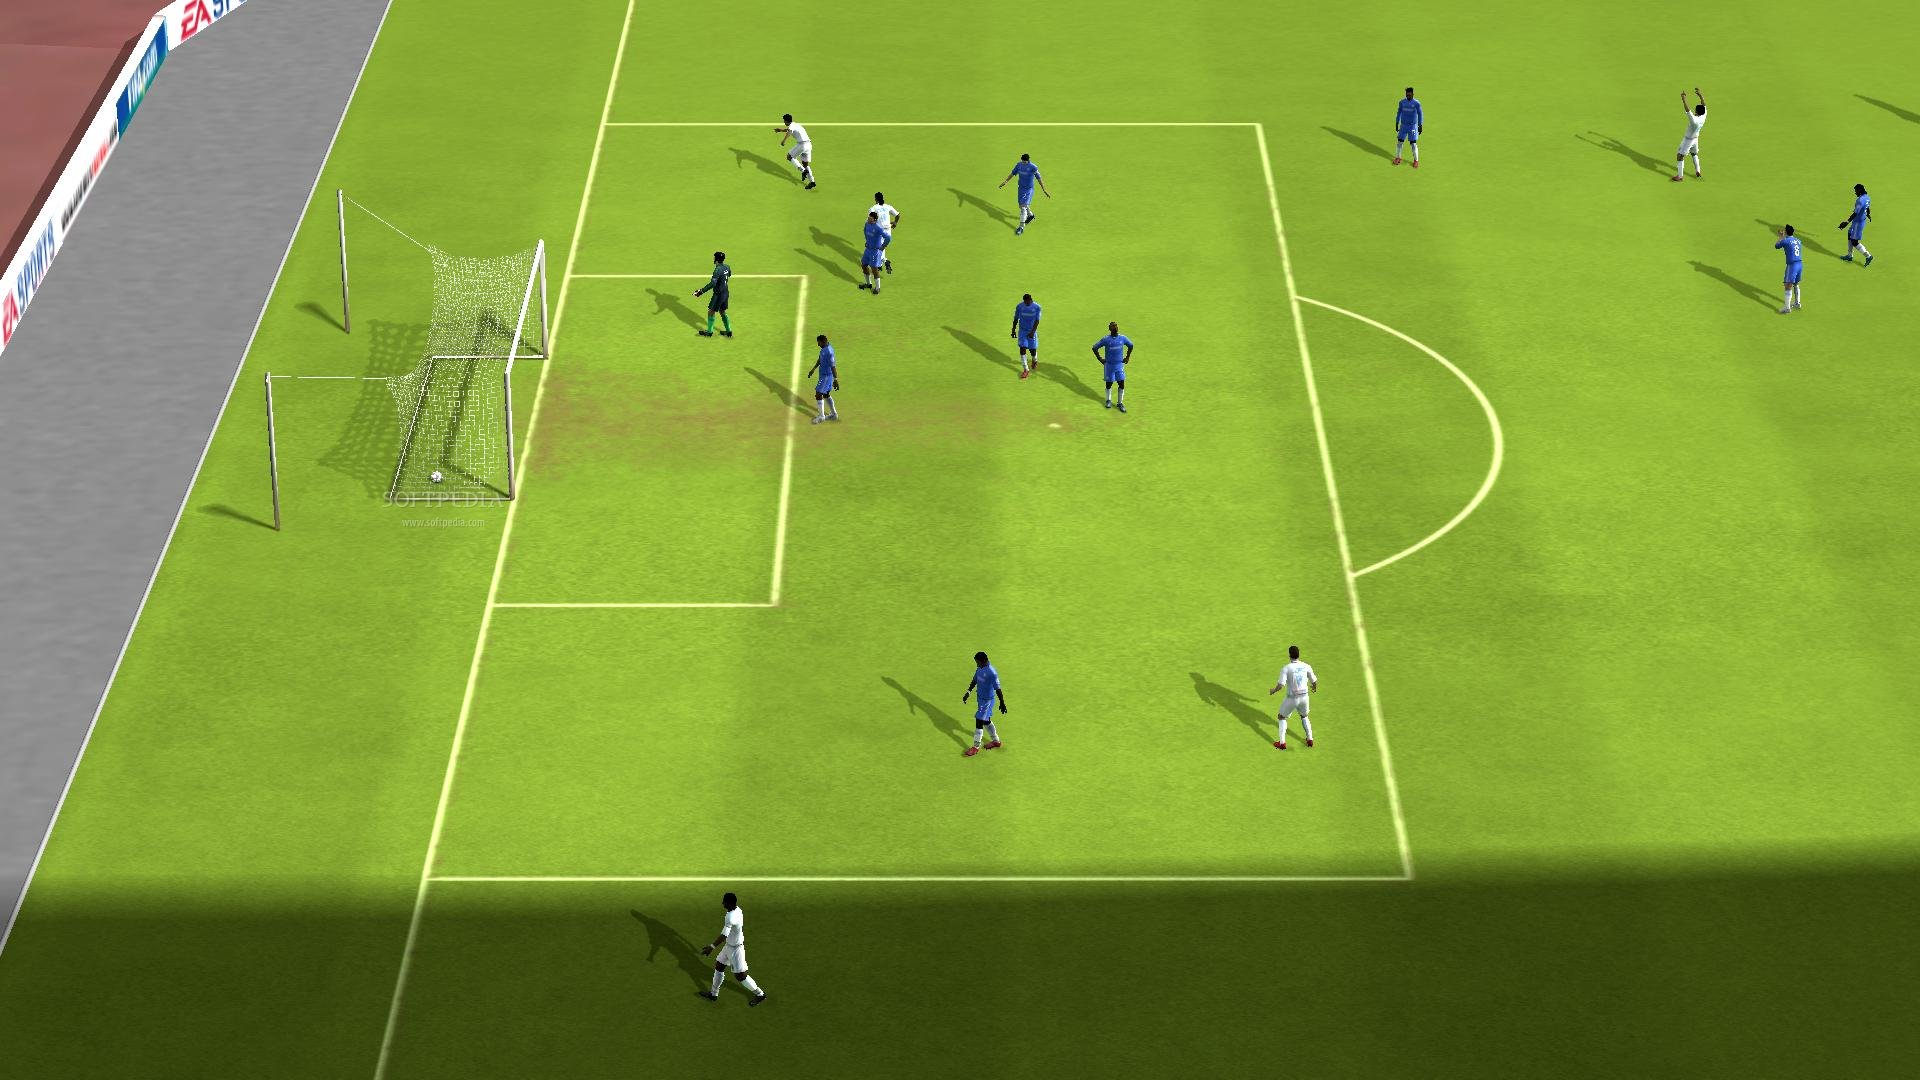 fifa manager zip file ppsspp download